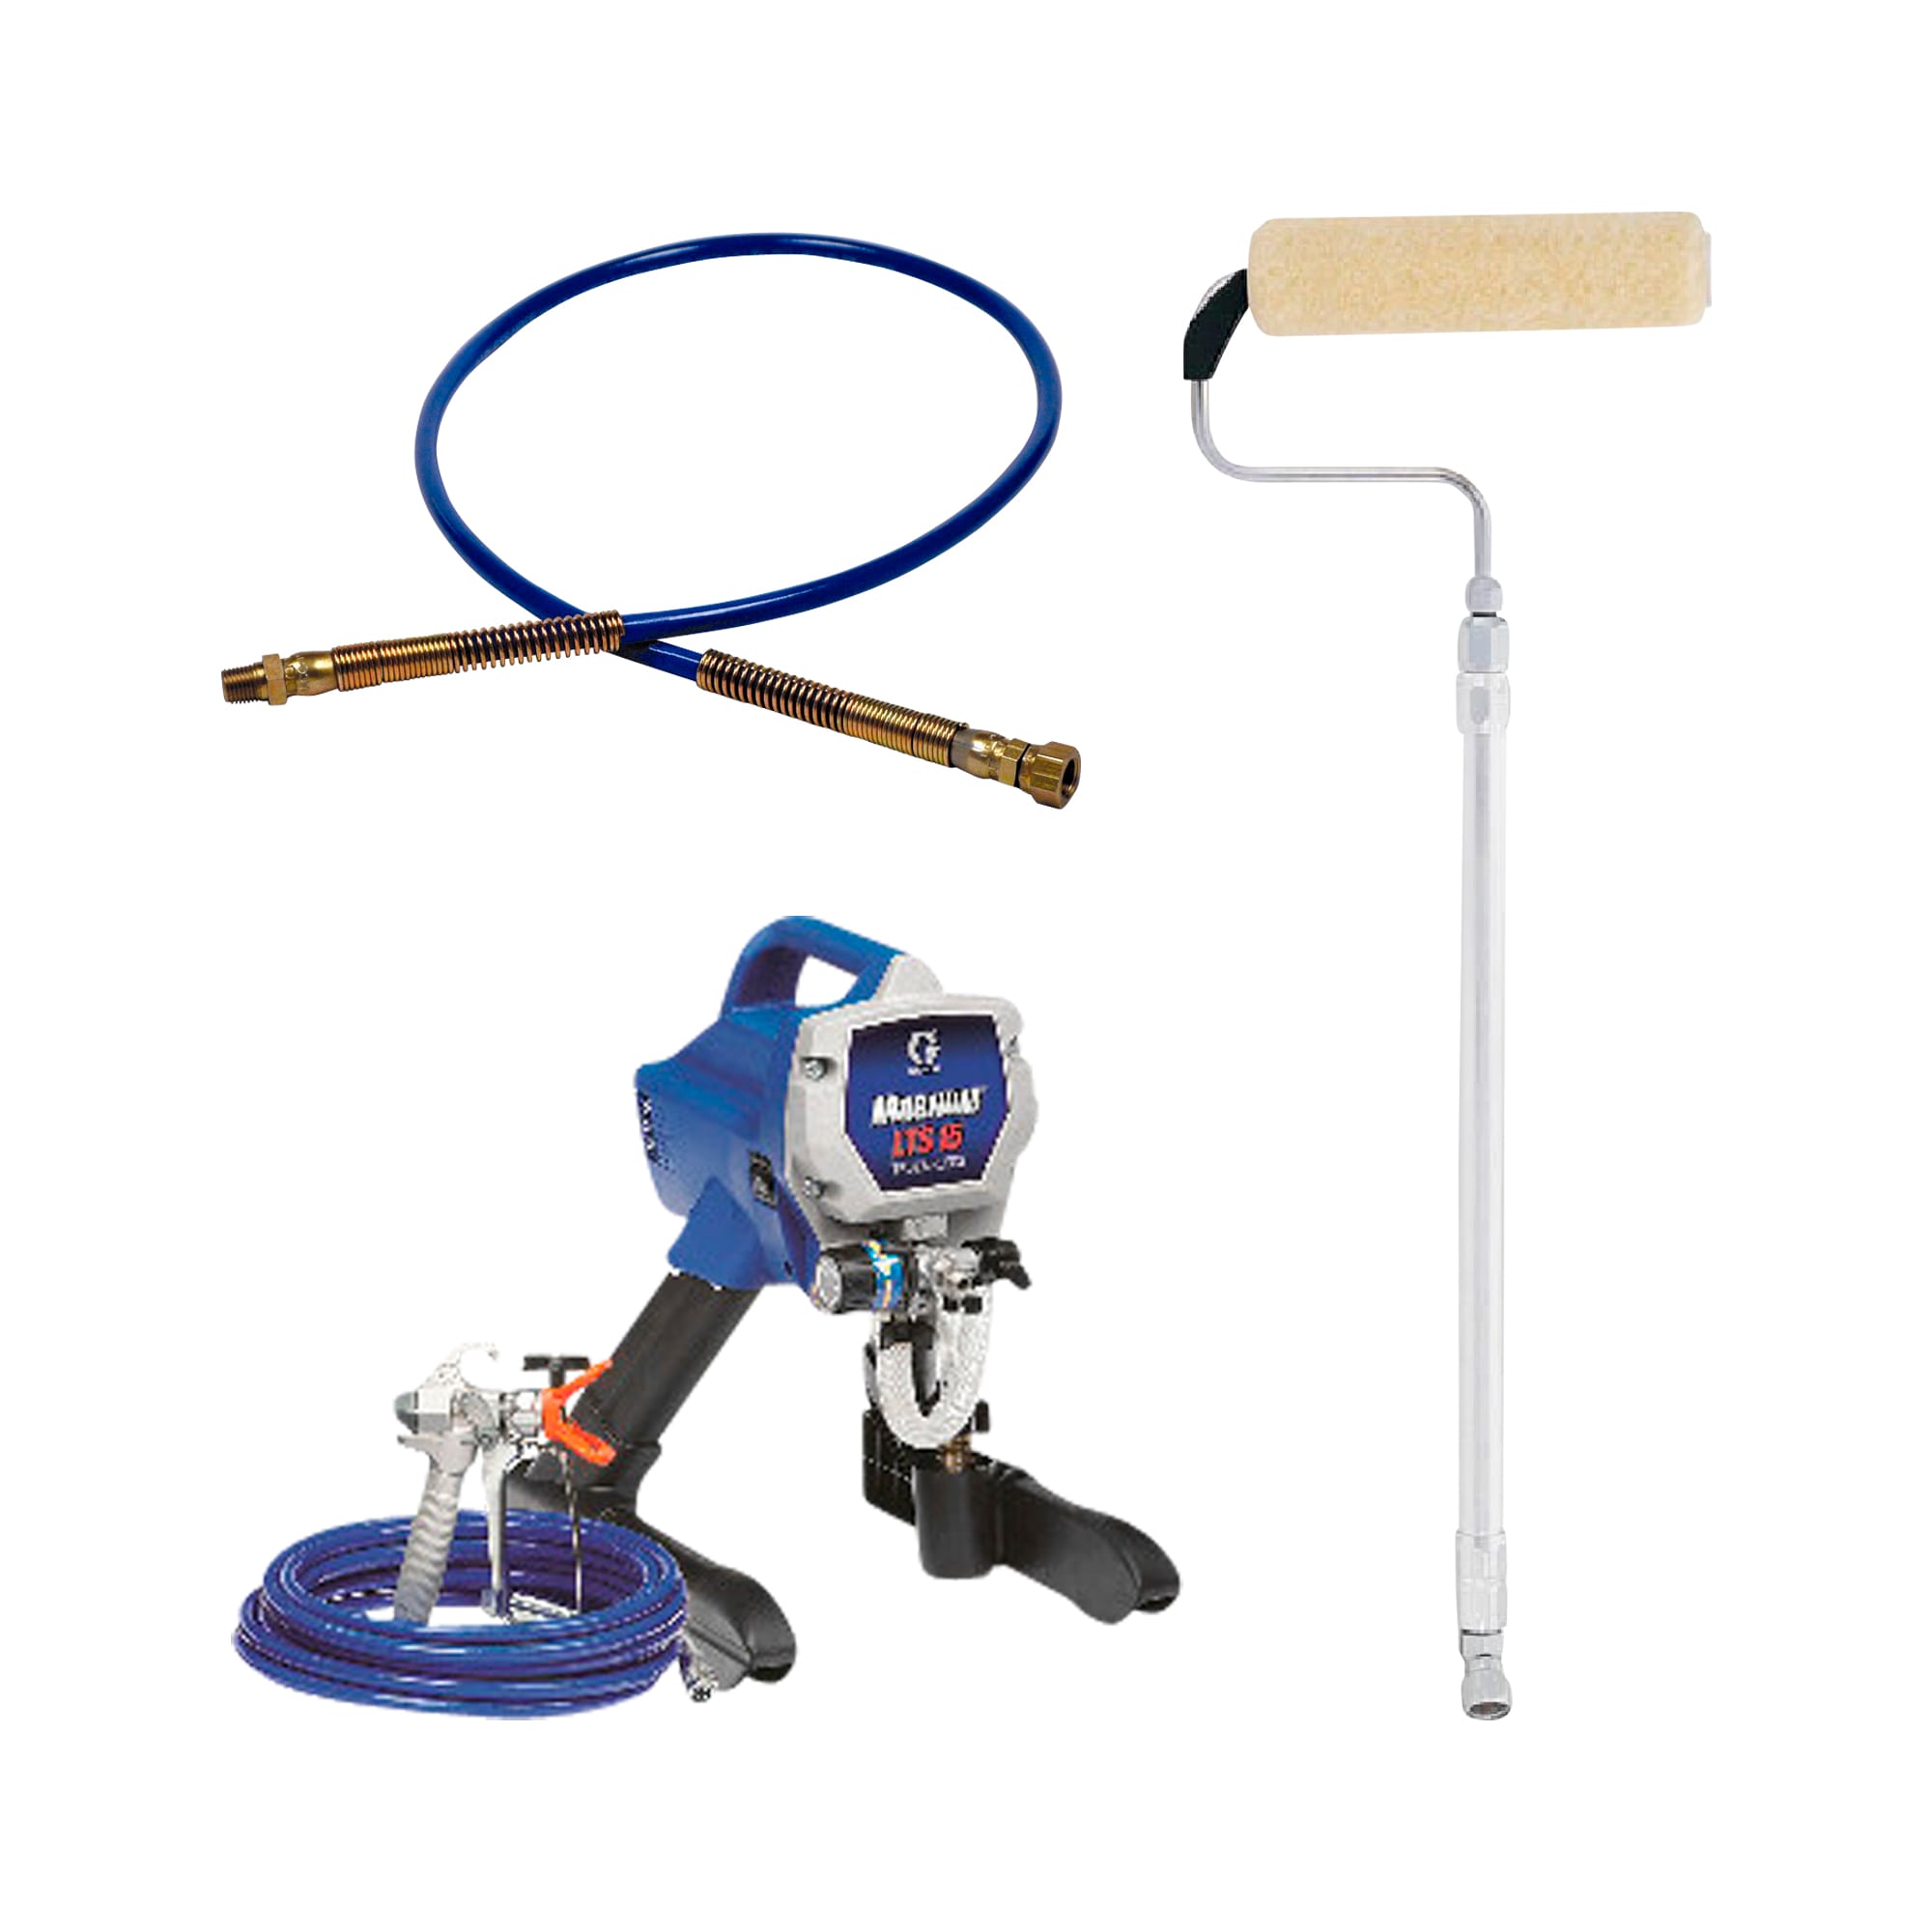 Shop Graco Graco Airless Paint Sprayer and Accessories at